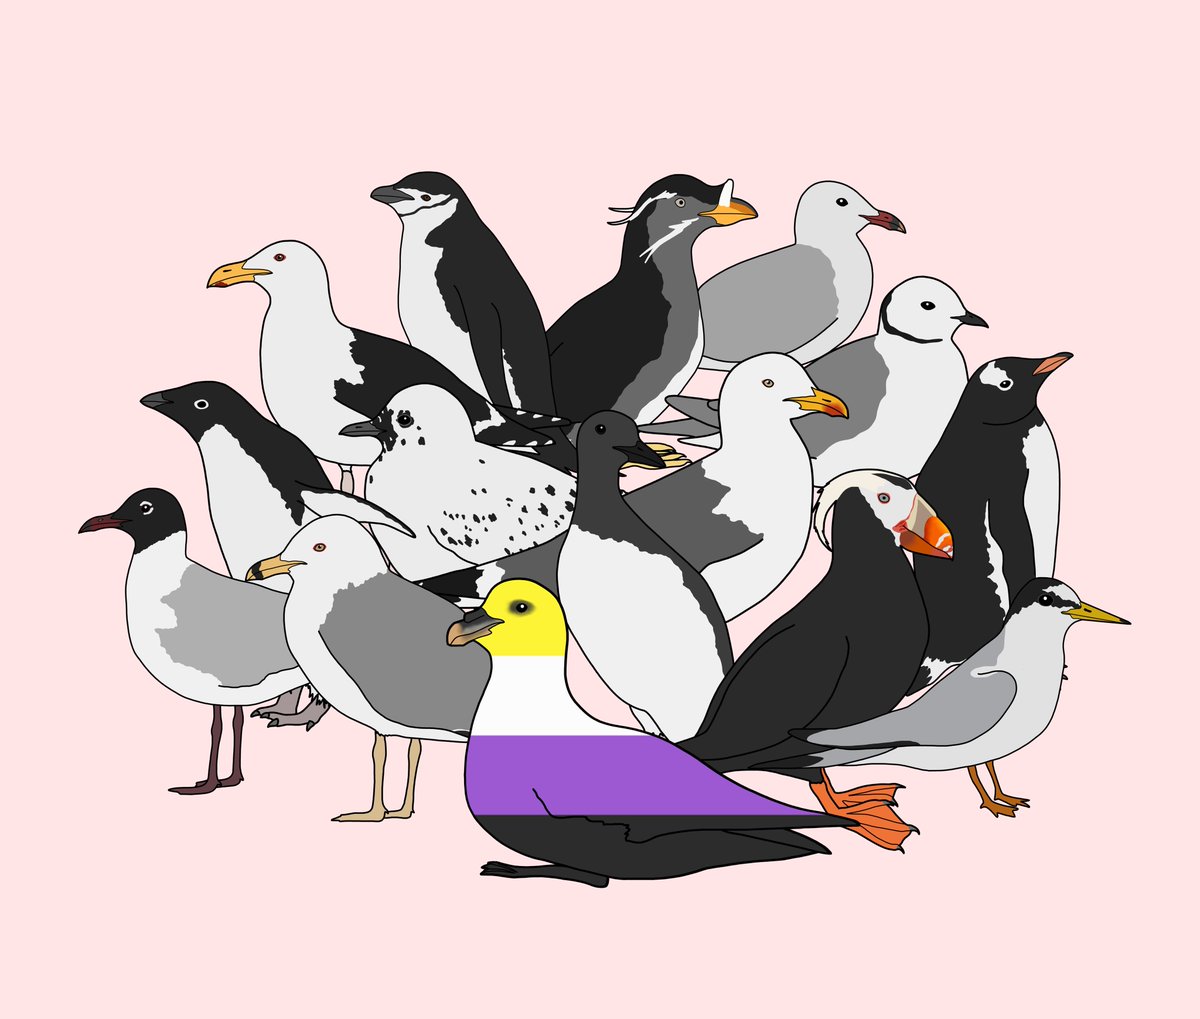 For the end of #PrideMonth, I want to acknowledge the friends/colleagues who have supported me unconditionally as a non-binary #seabird scientist, who stand with me against transphobia and always make sure I feel safe being myself. I wouldn't be able to do this without ya'll 💜